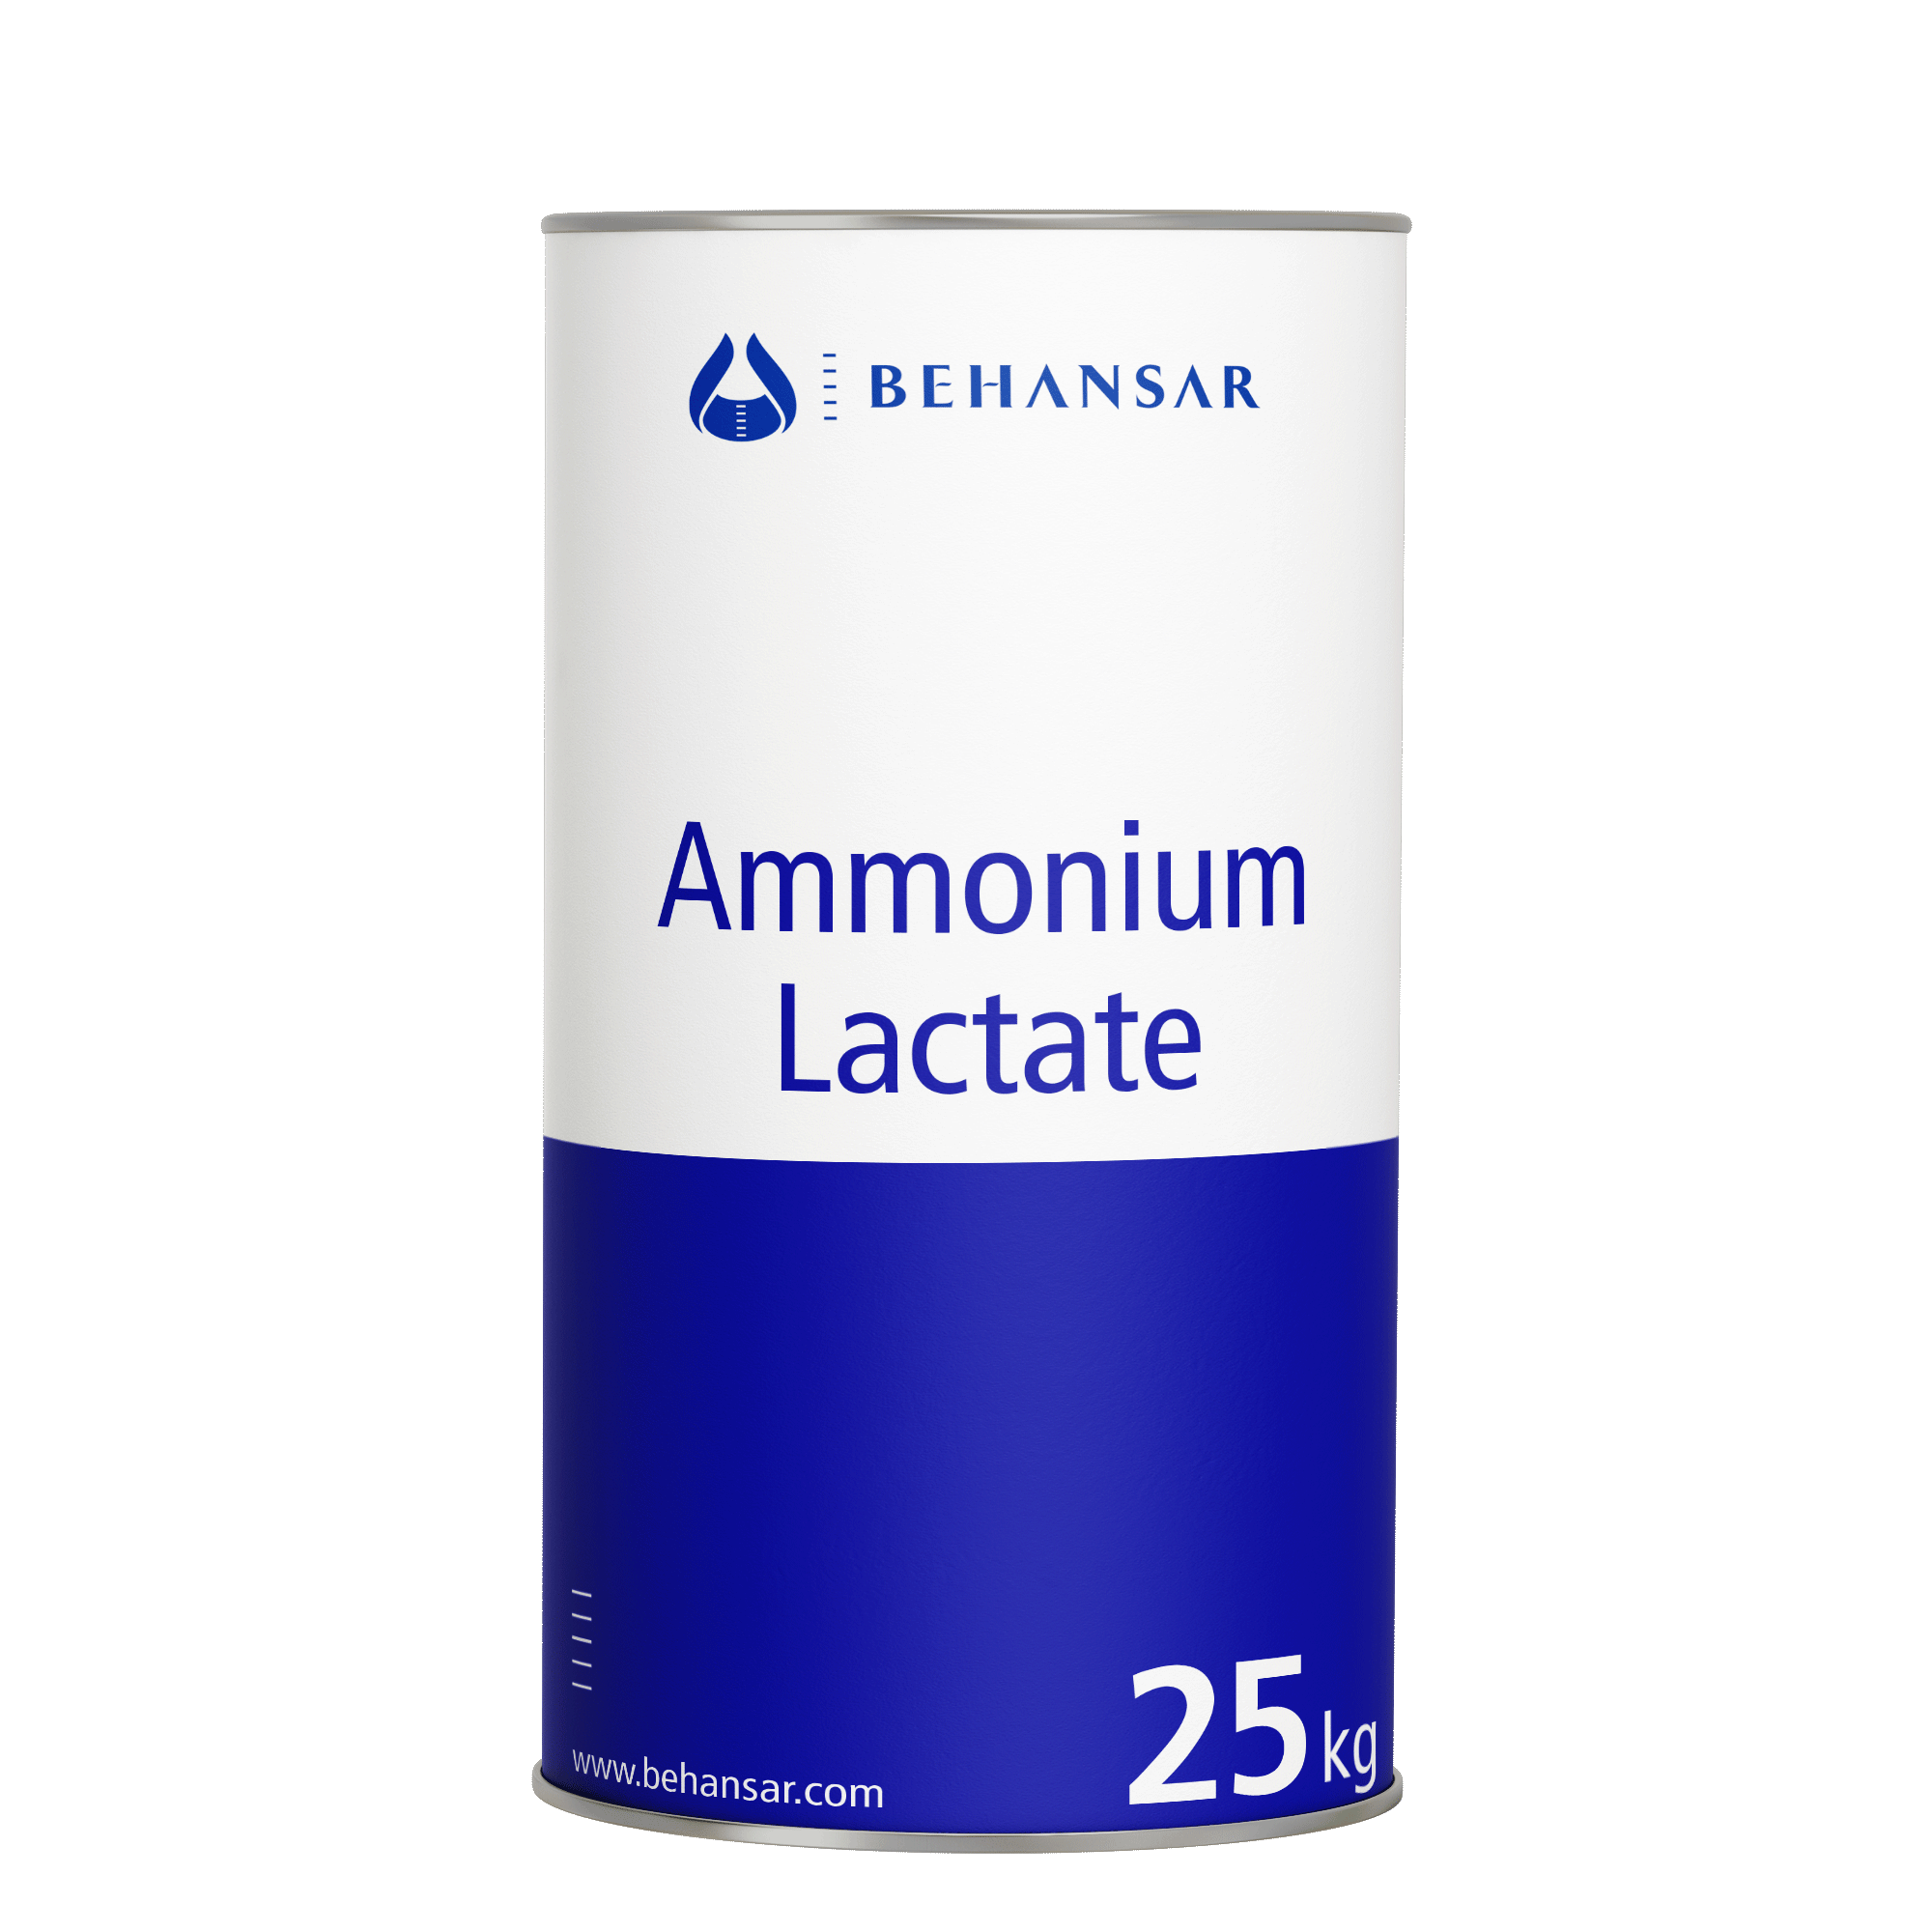 Ammonium Lactate is one of the products of Behansar Co